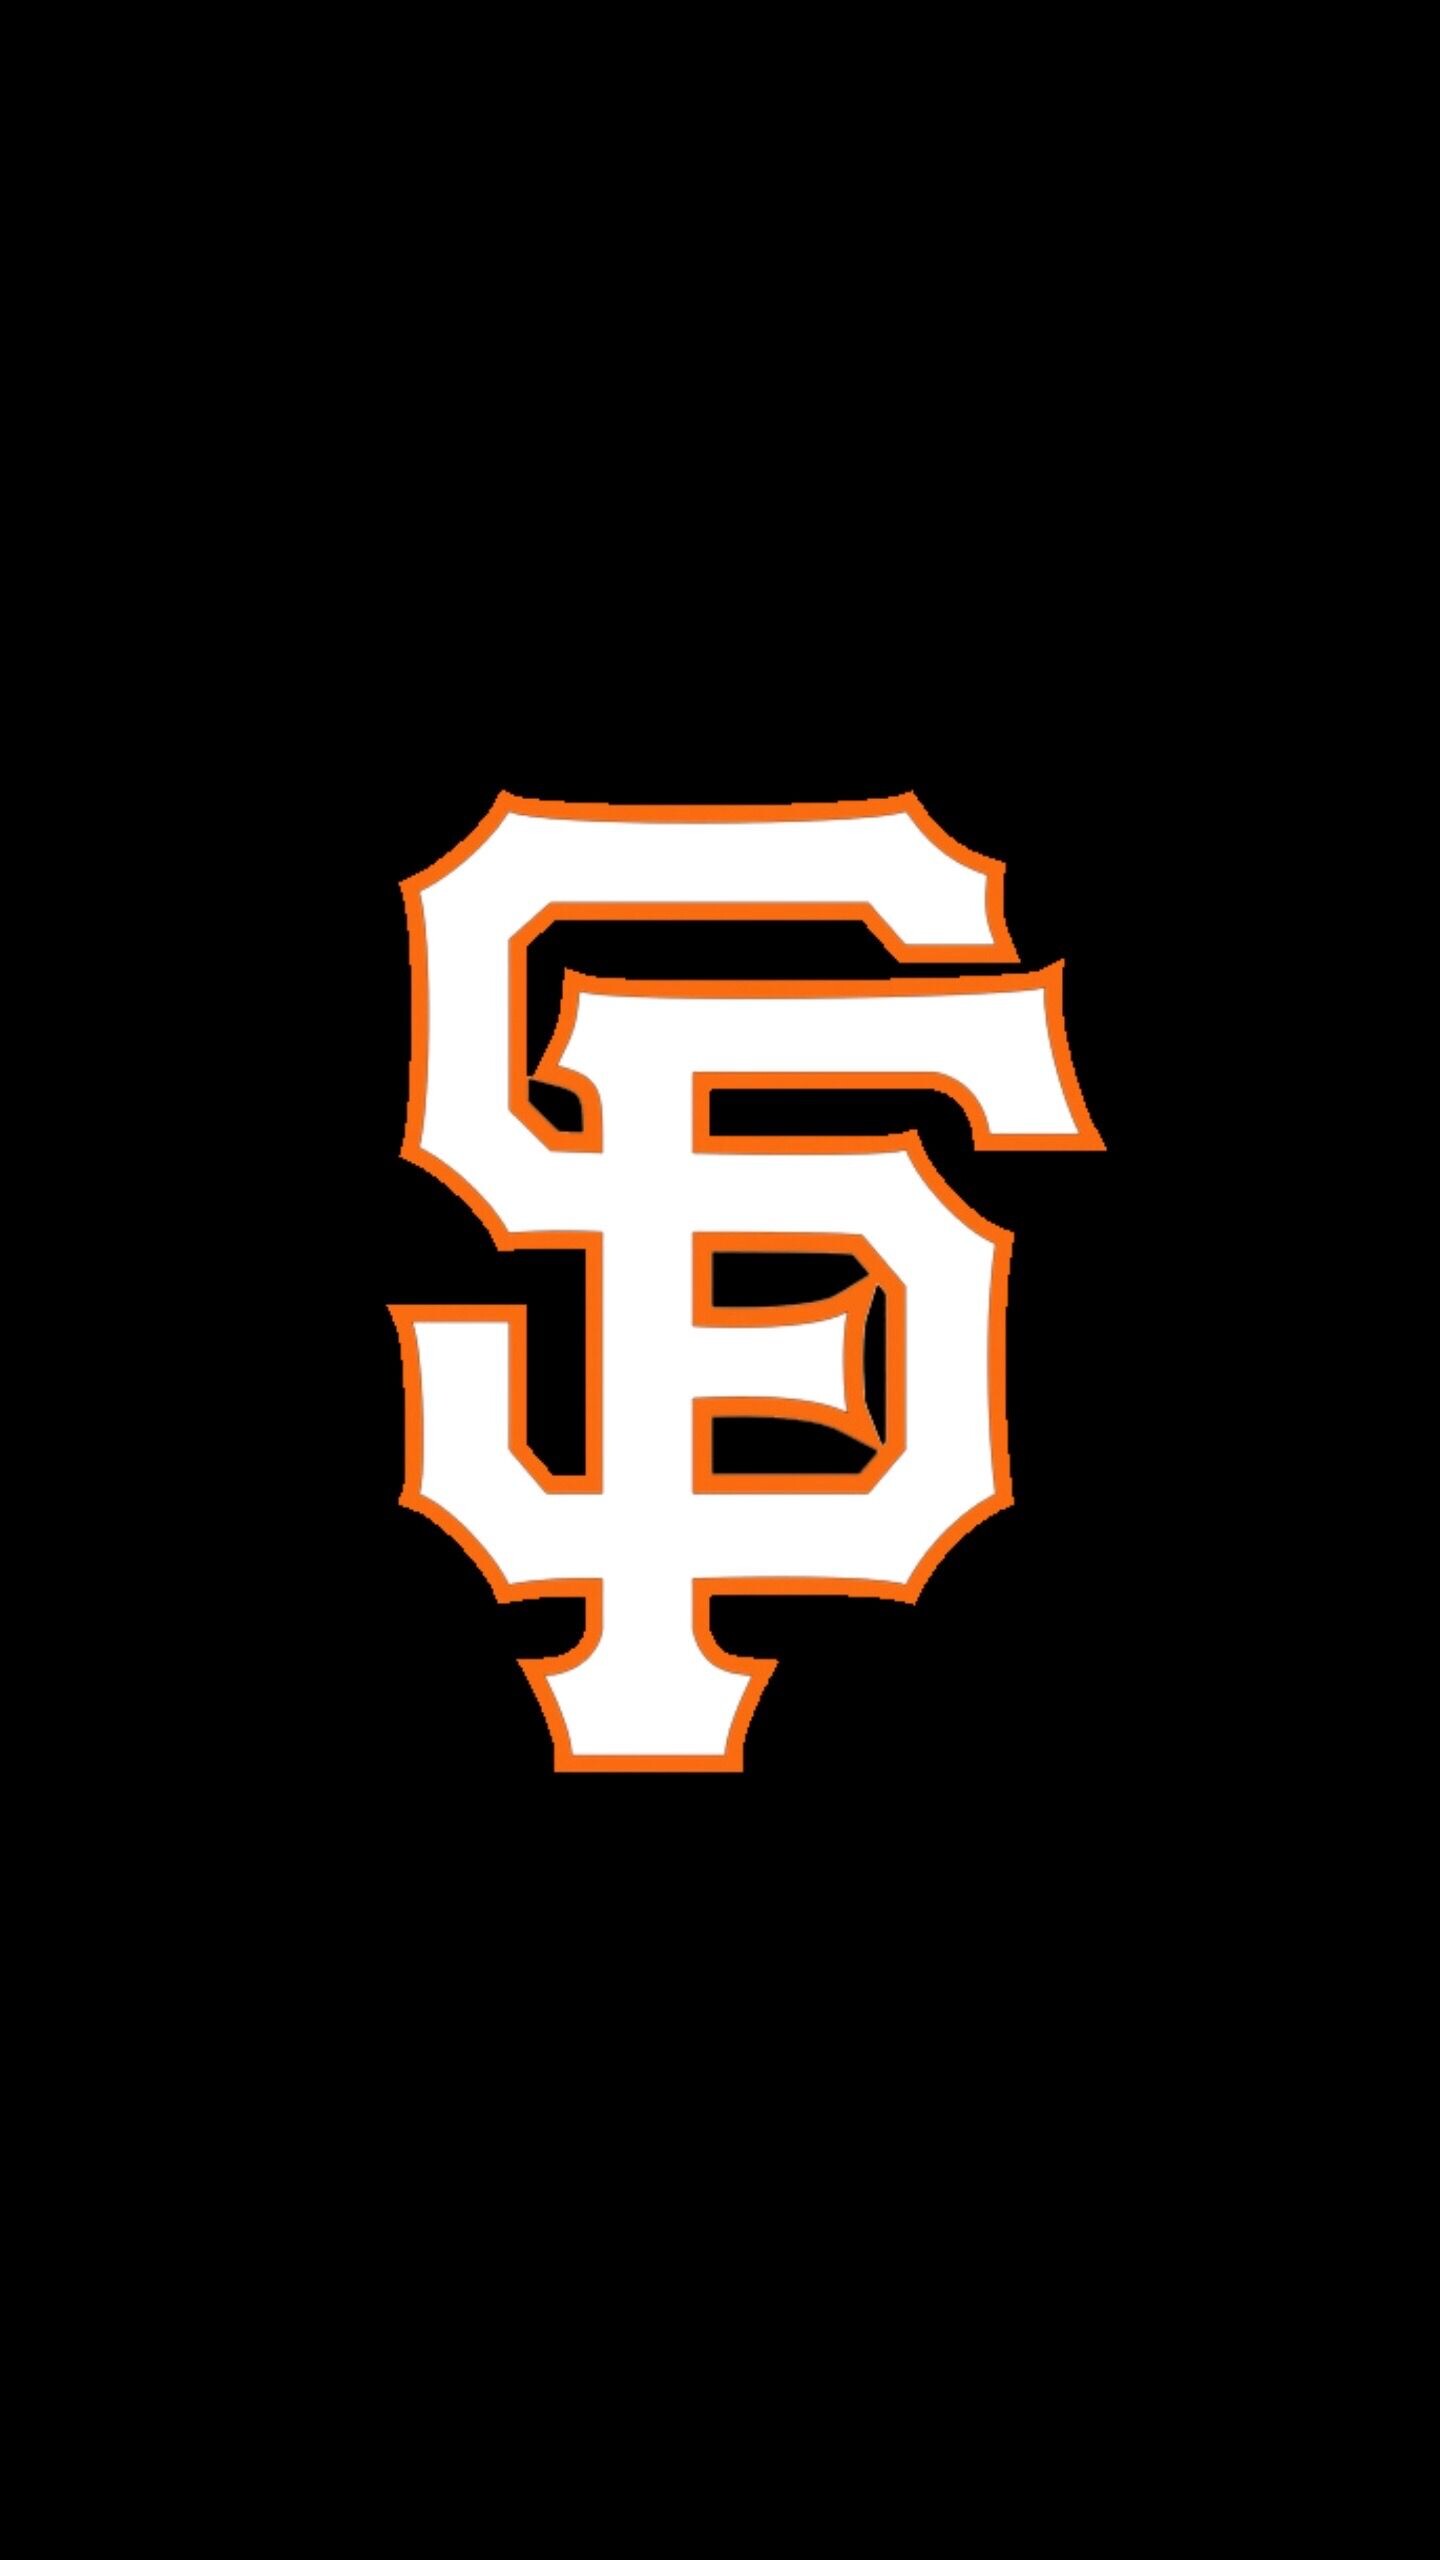 San Francisco Giants: Five-time World Series championships winners, The Baseball Hall of Fame members. 1440x2560 HD Background.